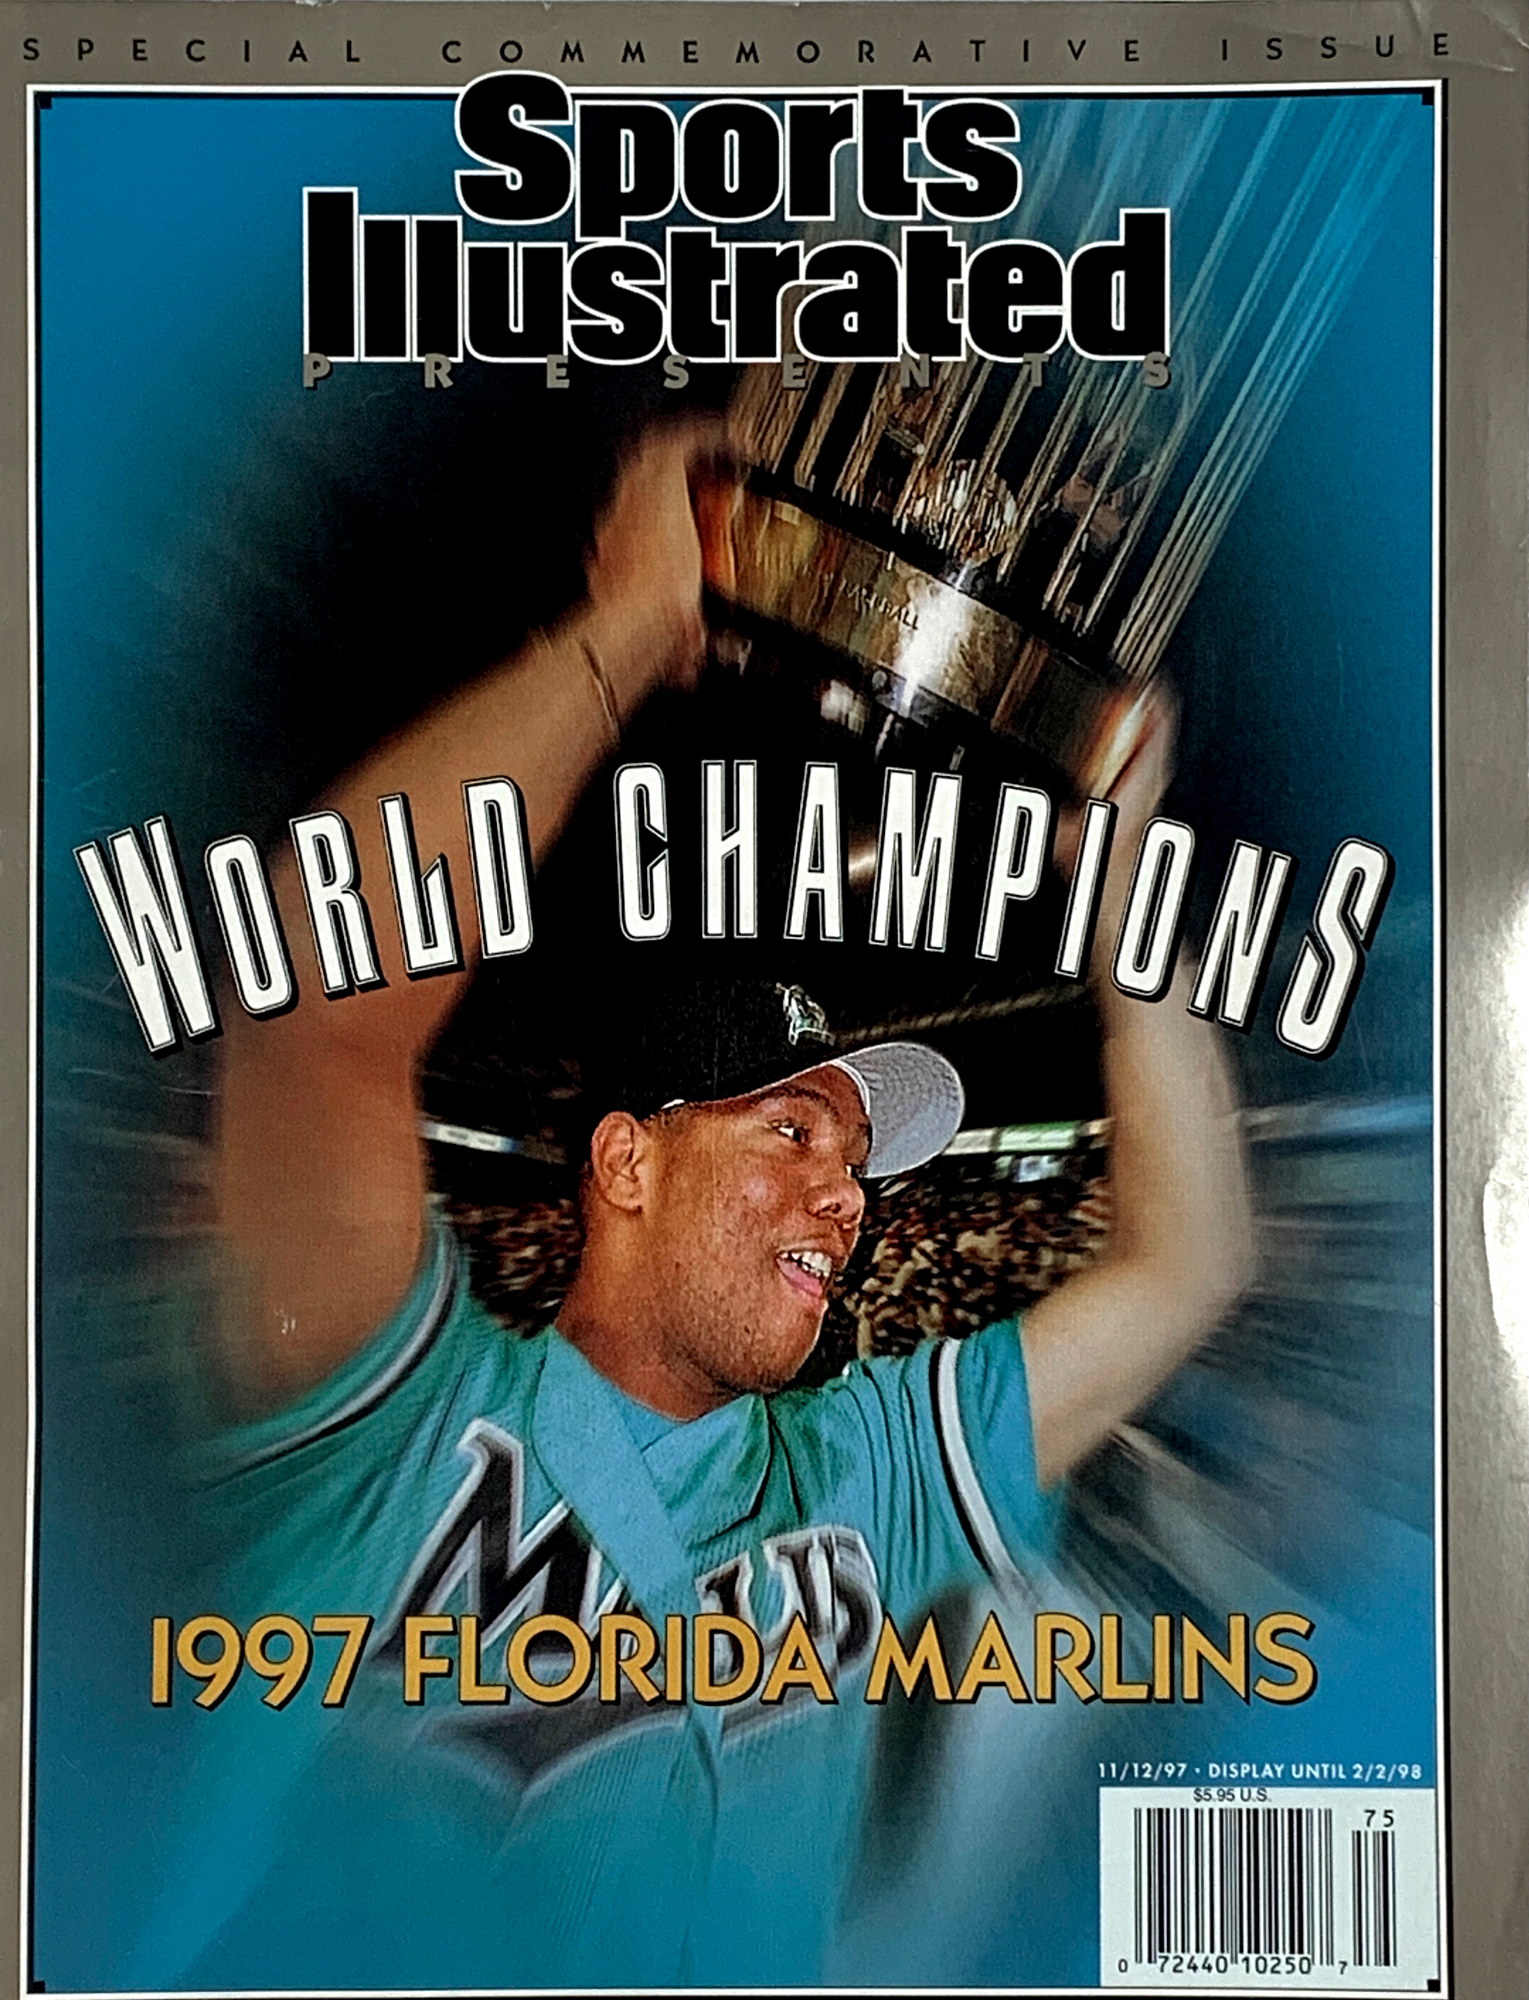 Marlins Win The WS (10/26/97)  On this day in 1997, Edgar